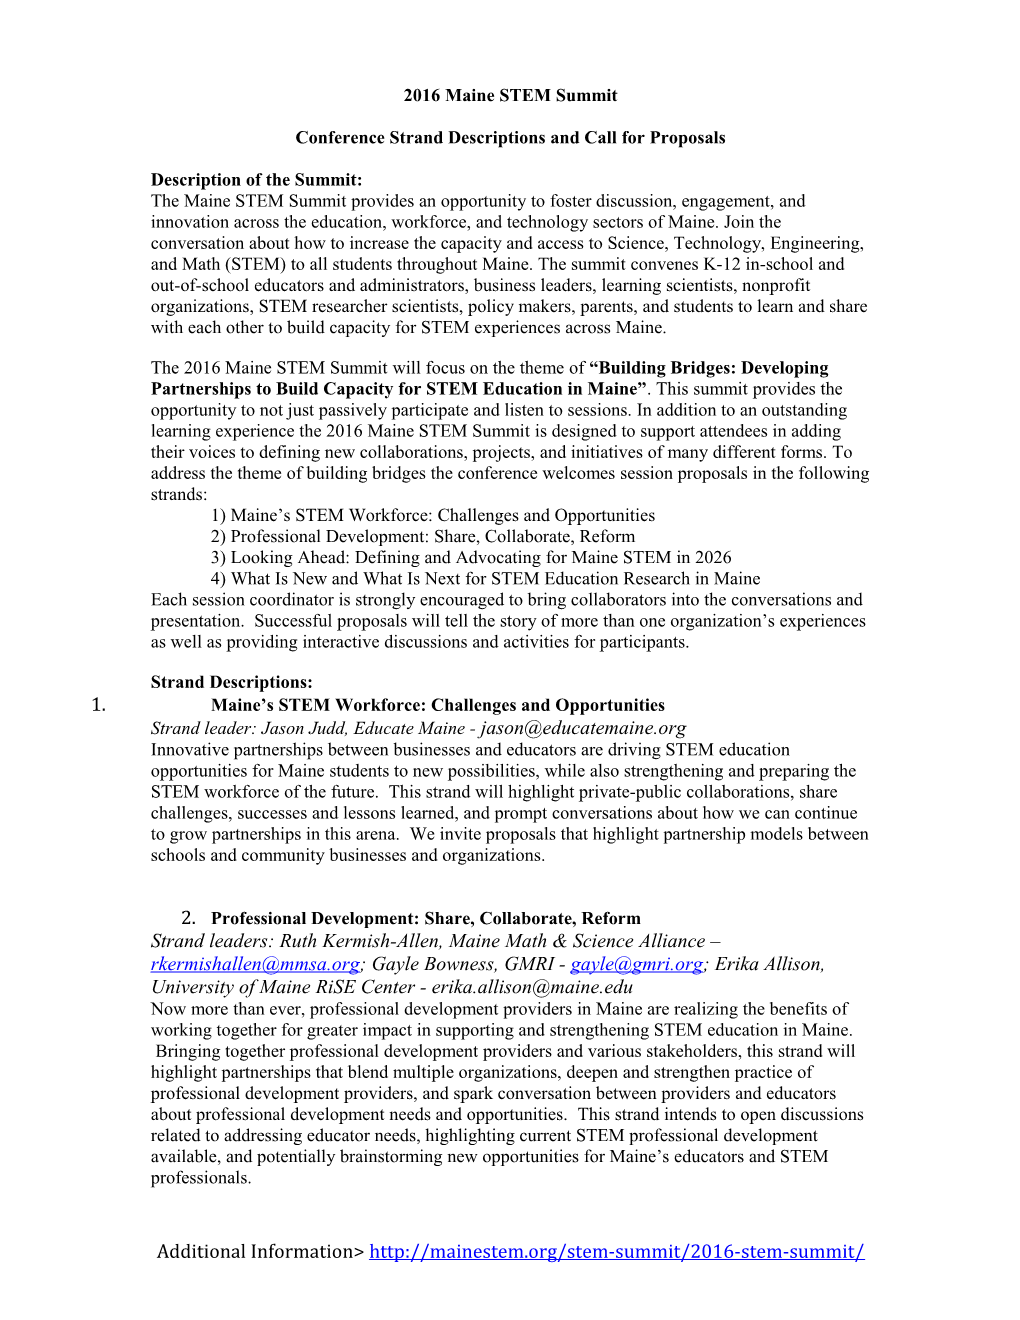 Conference Strand Descriptions and Call for Proposals